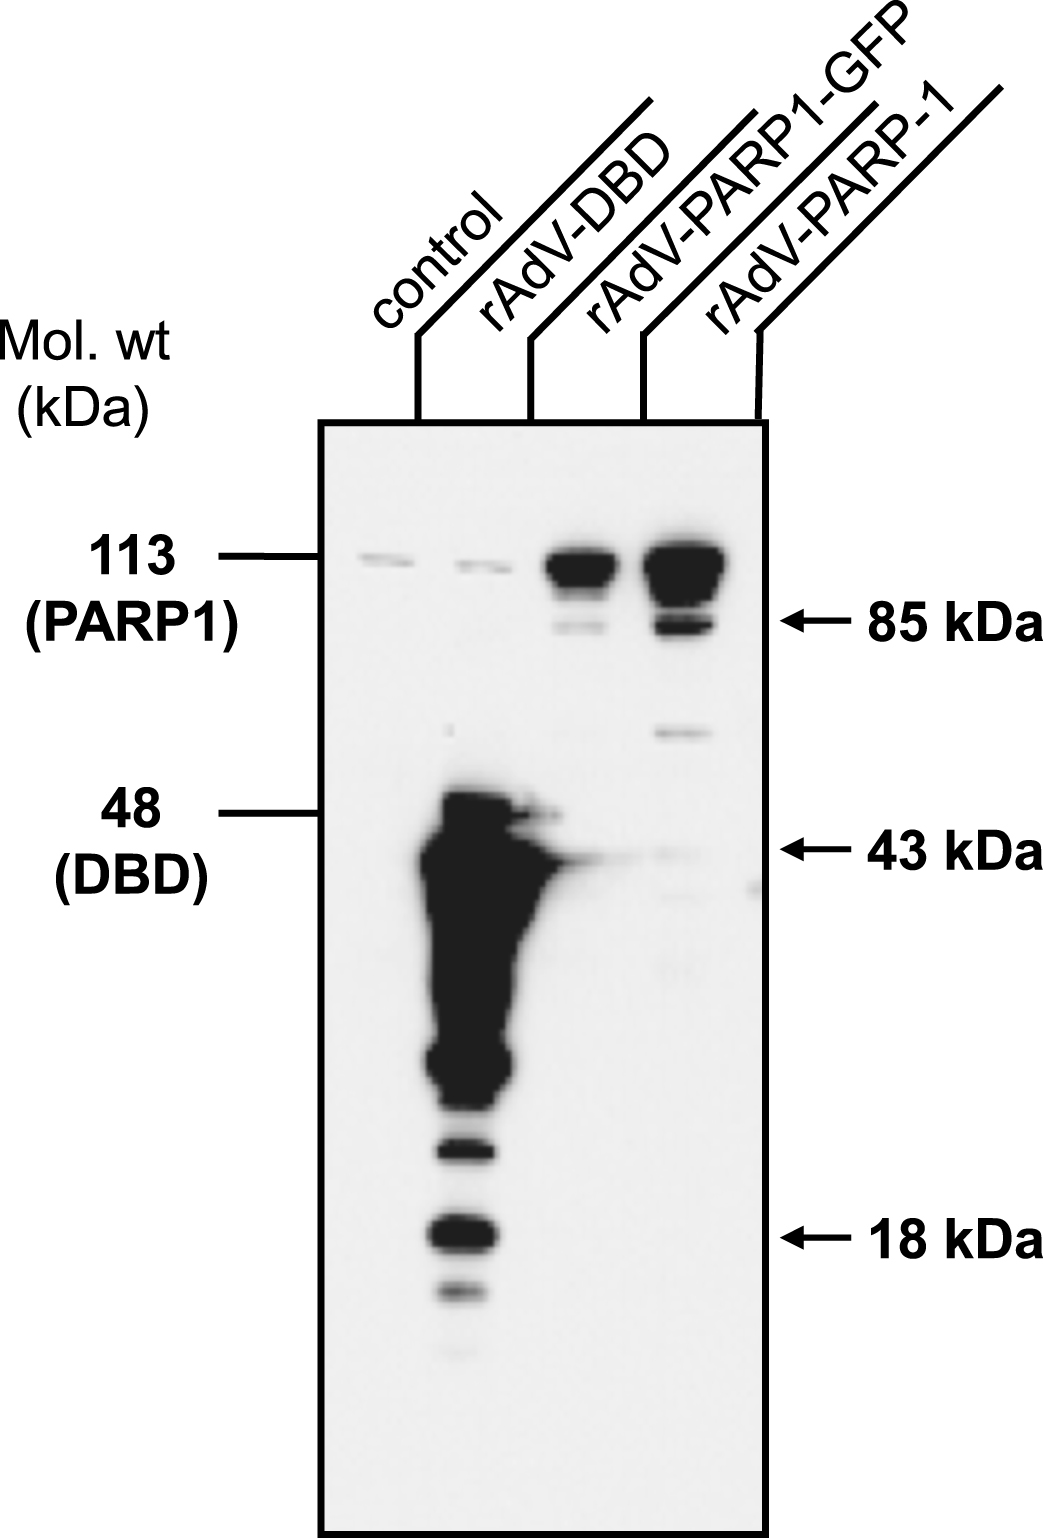 Transduced cells overexpress PARP1 and PARP1 DBD. Normal human fibroblast cells were transduced with rAdV-DBD, rAdV-PARP-GFP and rAdV-PARP (MOI = 25 each). Cell lysates were prepared 24 h after transduction and 1×105 cells were analyzed by western blot analysis using antibody C2-10 to detect PARP1 and DBD. Overexpression of PARP1 DBD and PARP1 of the expected sizes was observed at 45 kDa and 113 kDa, respectively. Apoptotic fragments (arrows) and proteolytic cleavage products of both PARP-1 DBD and PARP-1 were also detectable. Note the slightly lower expression levels obtained with rAd-PARP1-GFP as compared to rAd-PARP1.